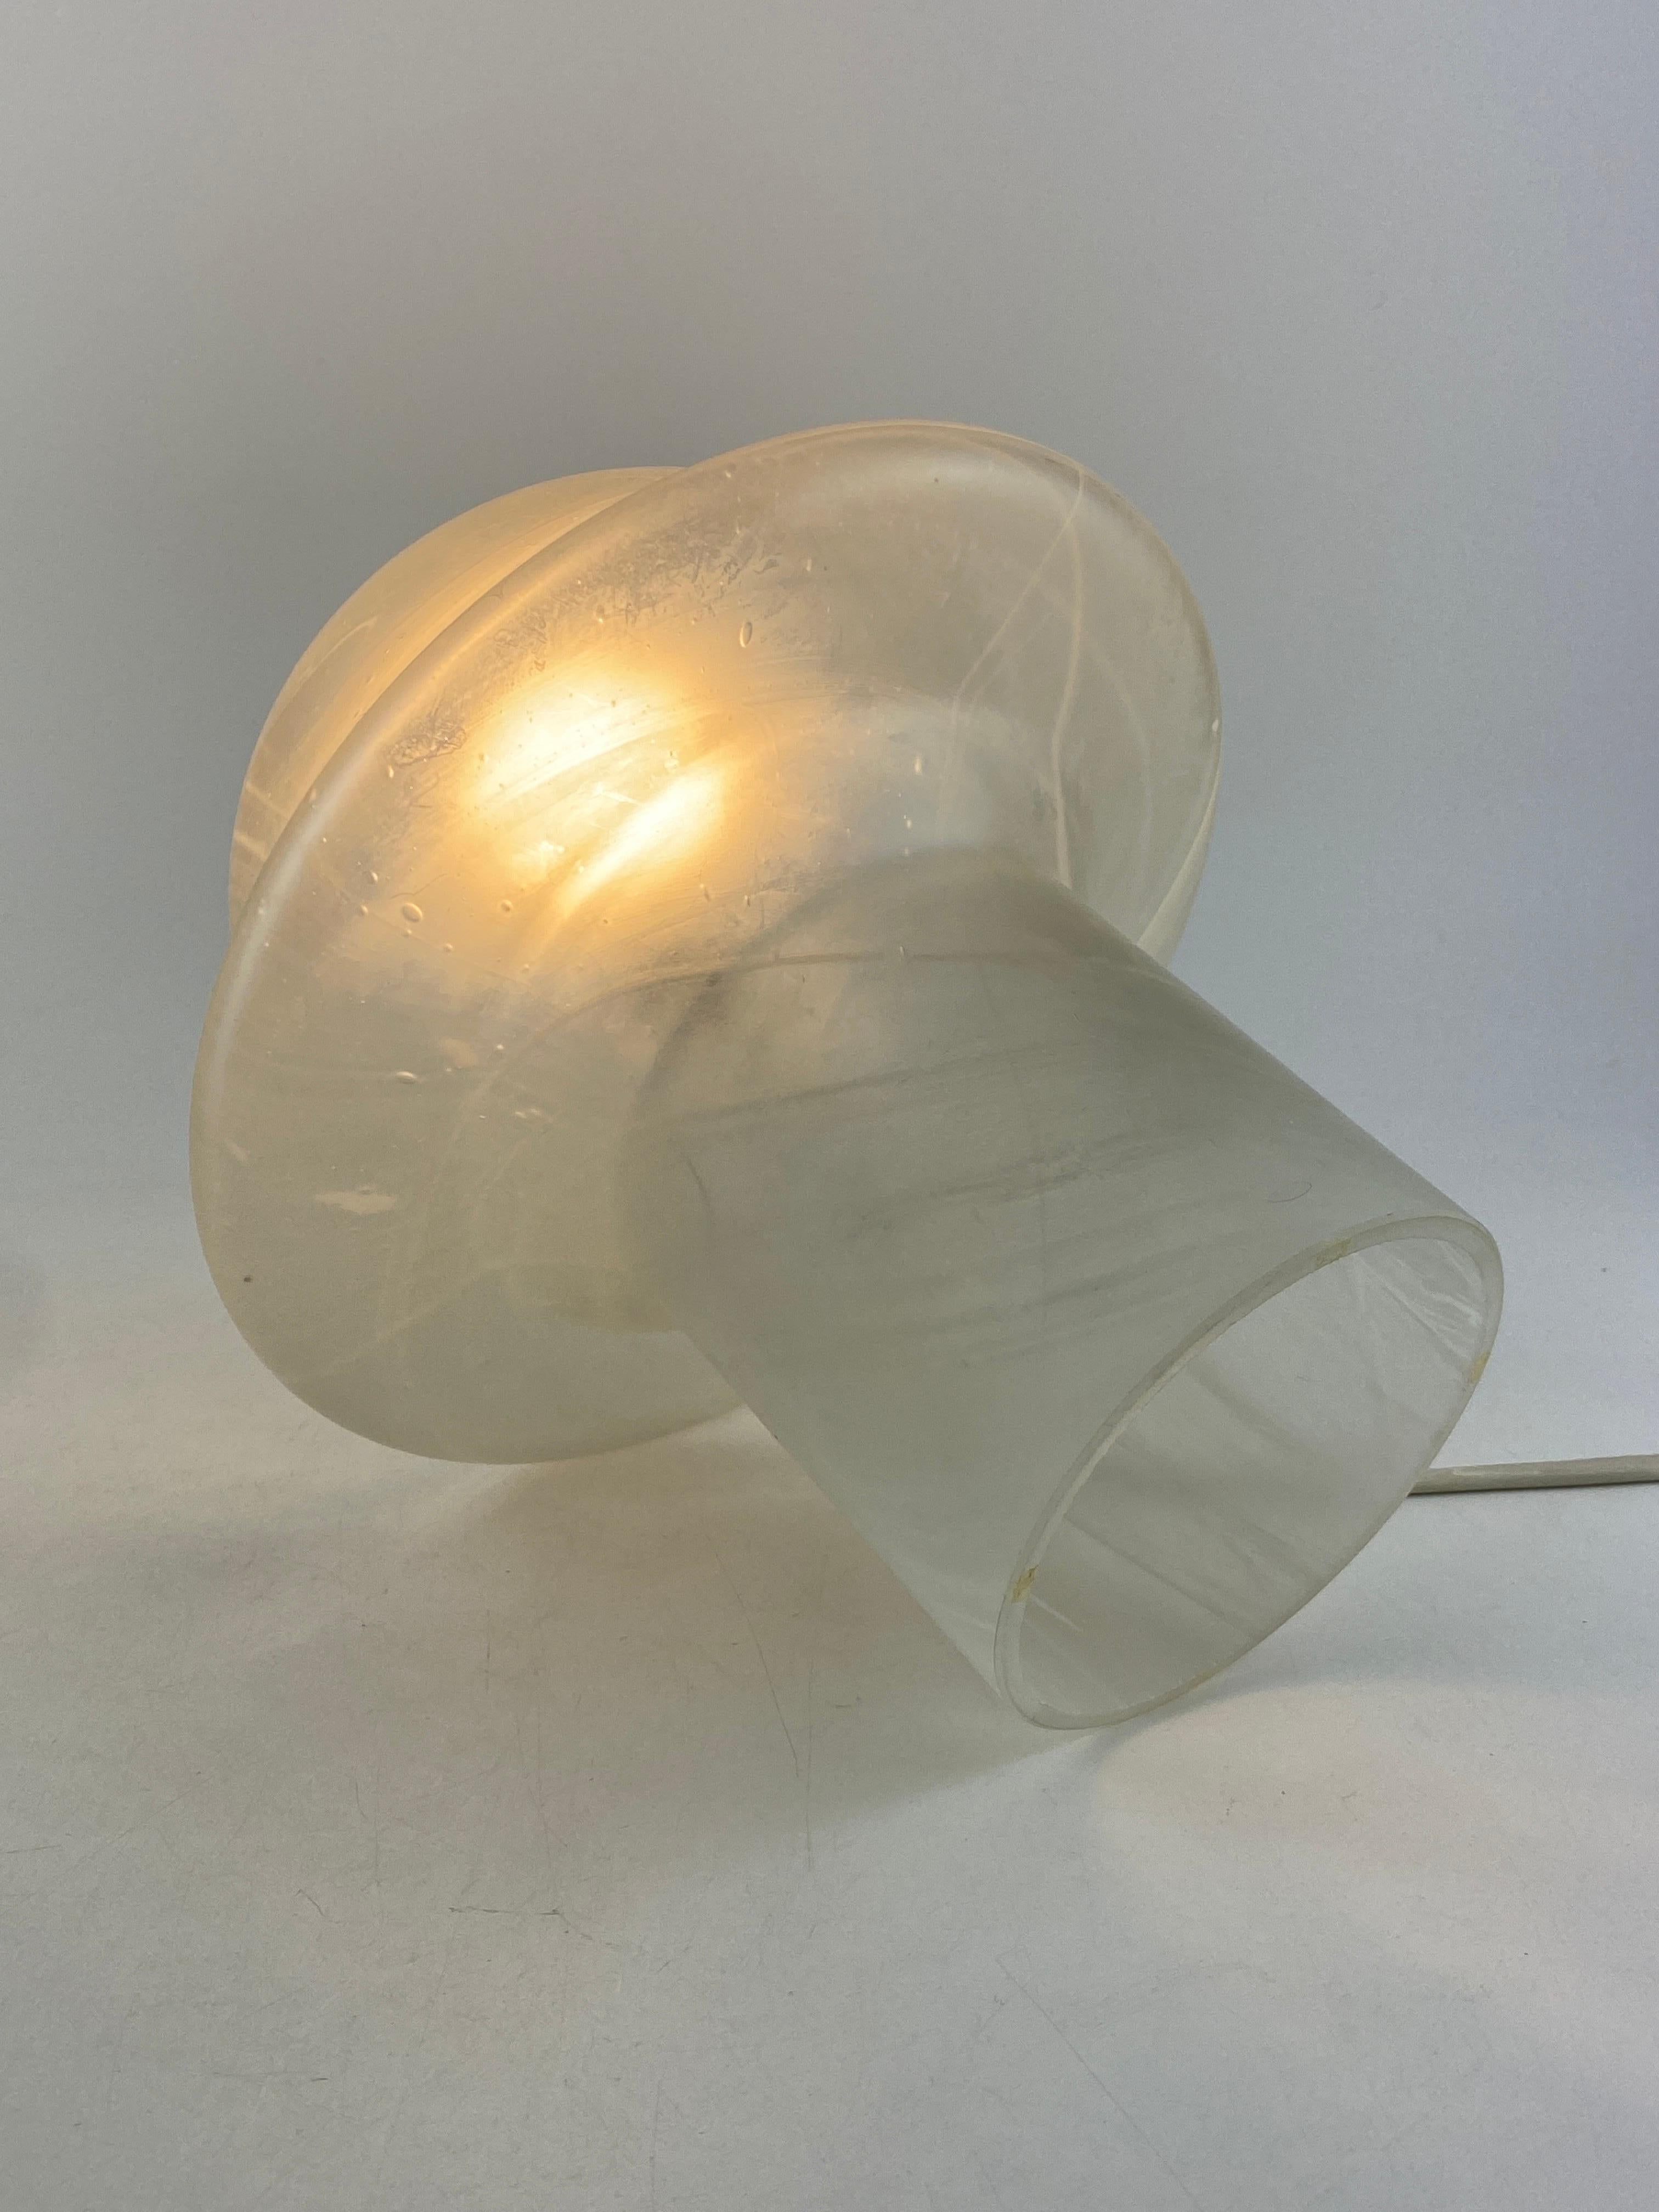 Beautiful German design by Peill and Putzler, produced around 1970 - 1980.

This lamp is made of one mouth-blown piece of clear crystal glass, that's why every piece is unique. It has a striped print and it's shaped like a typical mid-century